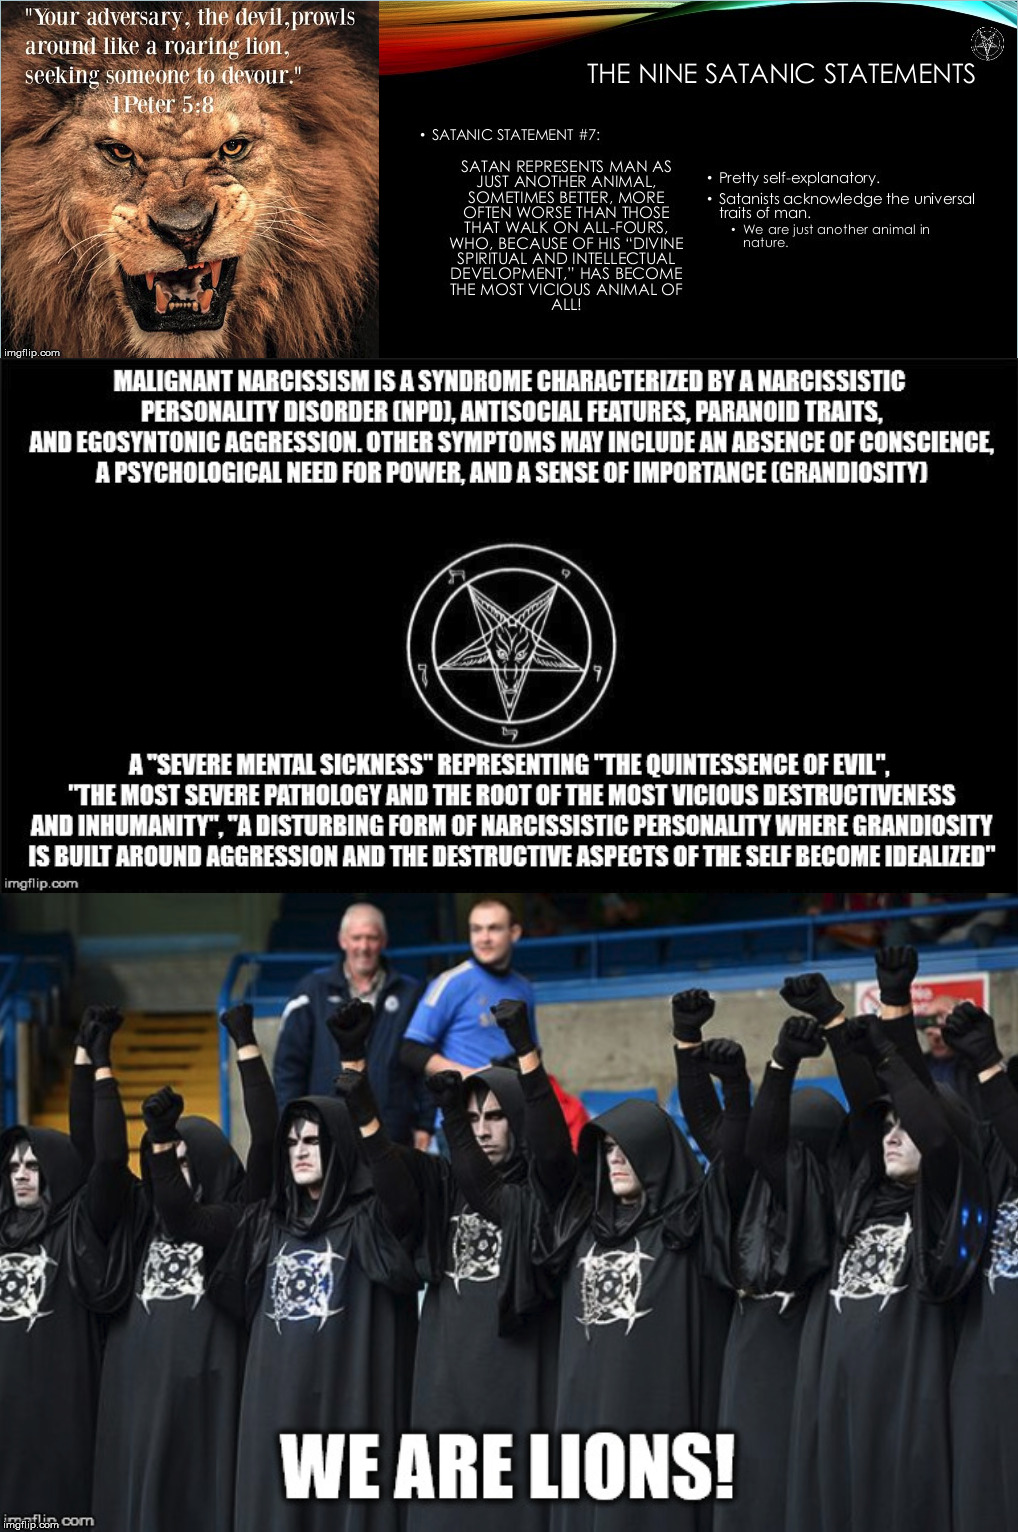 1 Peter 5:8, The seventh Satanic statement and malignant narcissism. | image tagged in 1 peter 5 8,7th satanic statement,malignant narcissism,vicious,destructive,lions | made w/ Imgflip meme maker